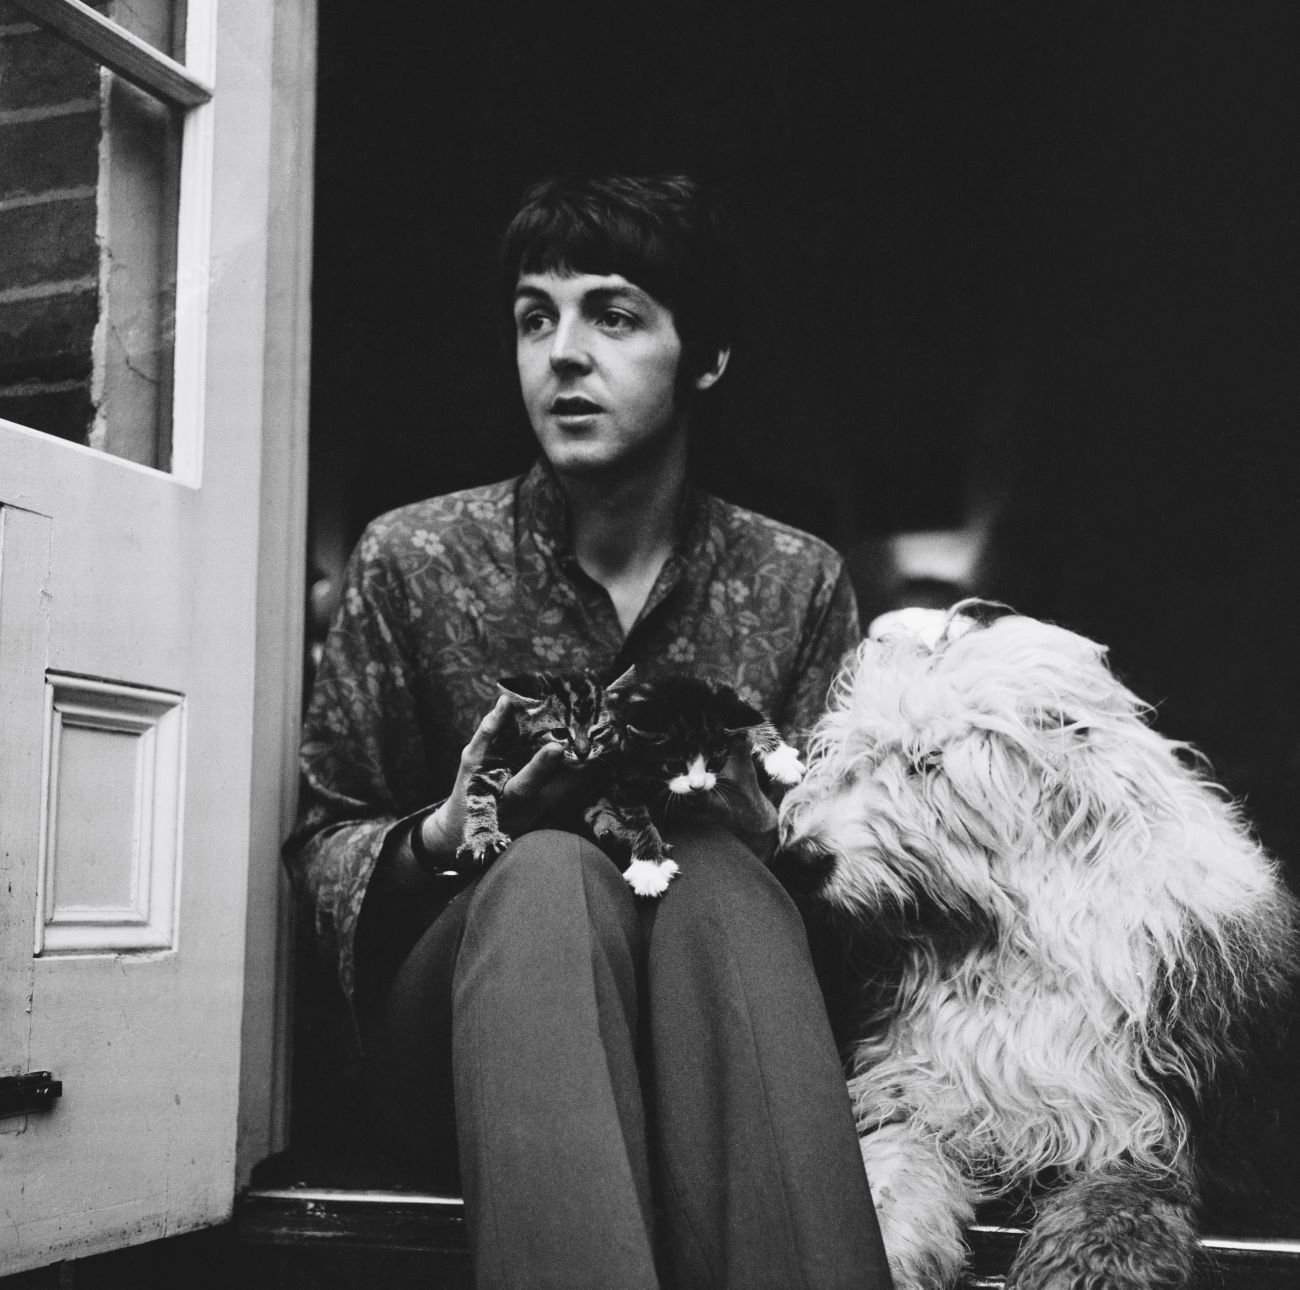 A black and white picture of Paul McCartney sitting in a doorway with a cat on his lap and a dog next to him.